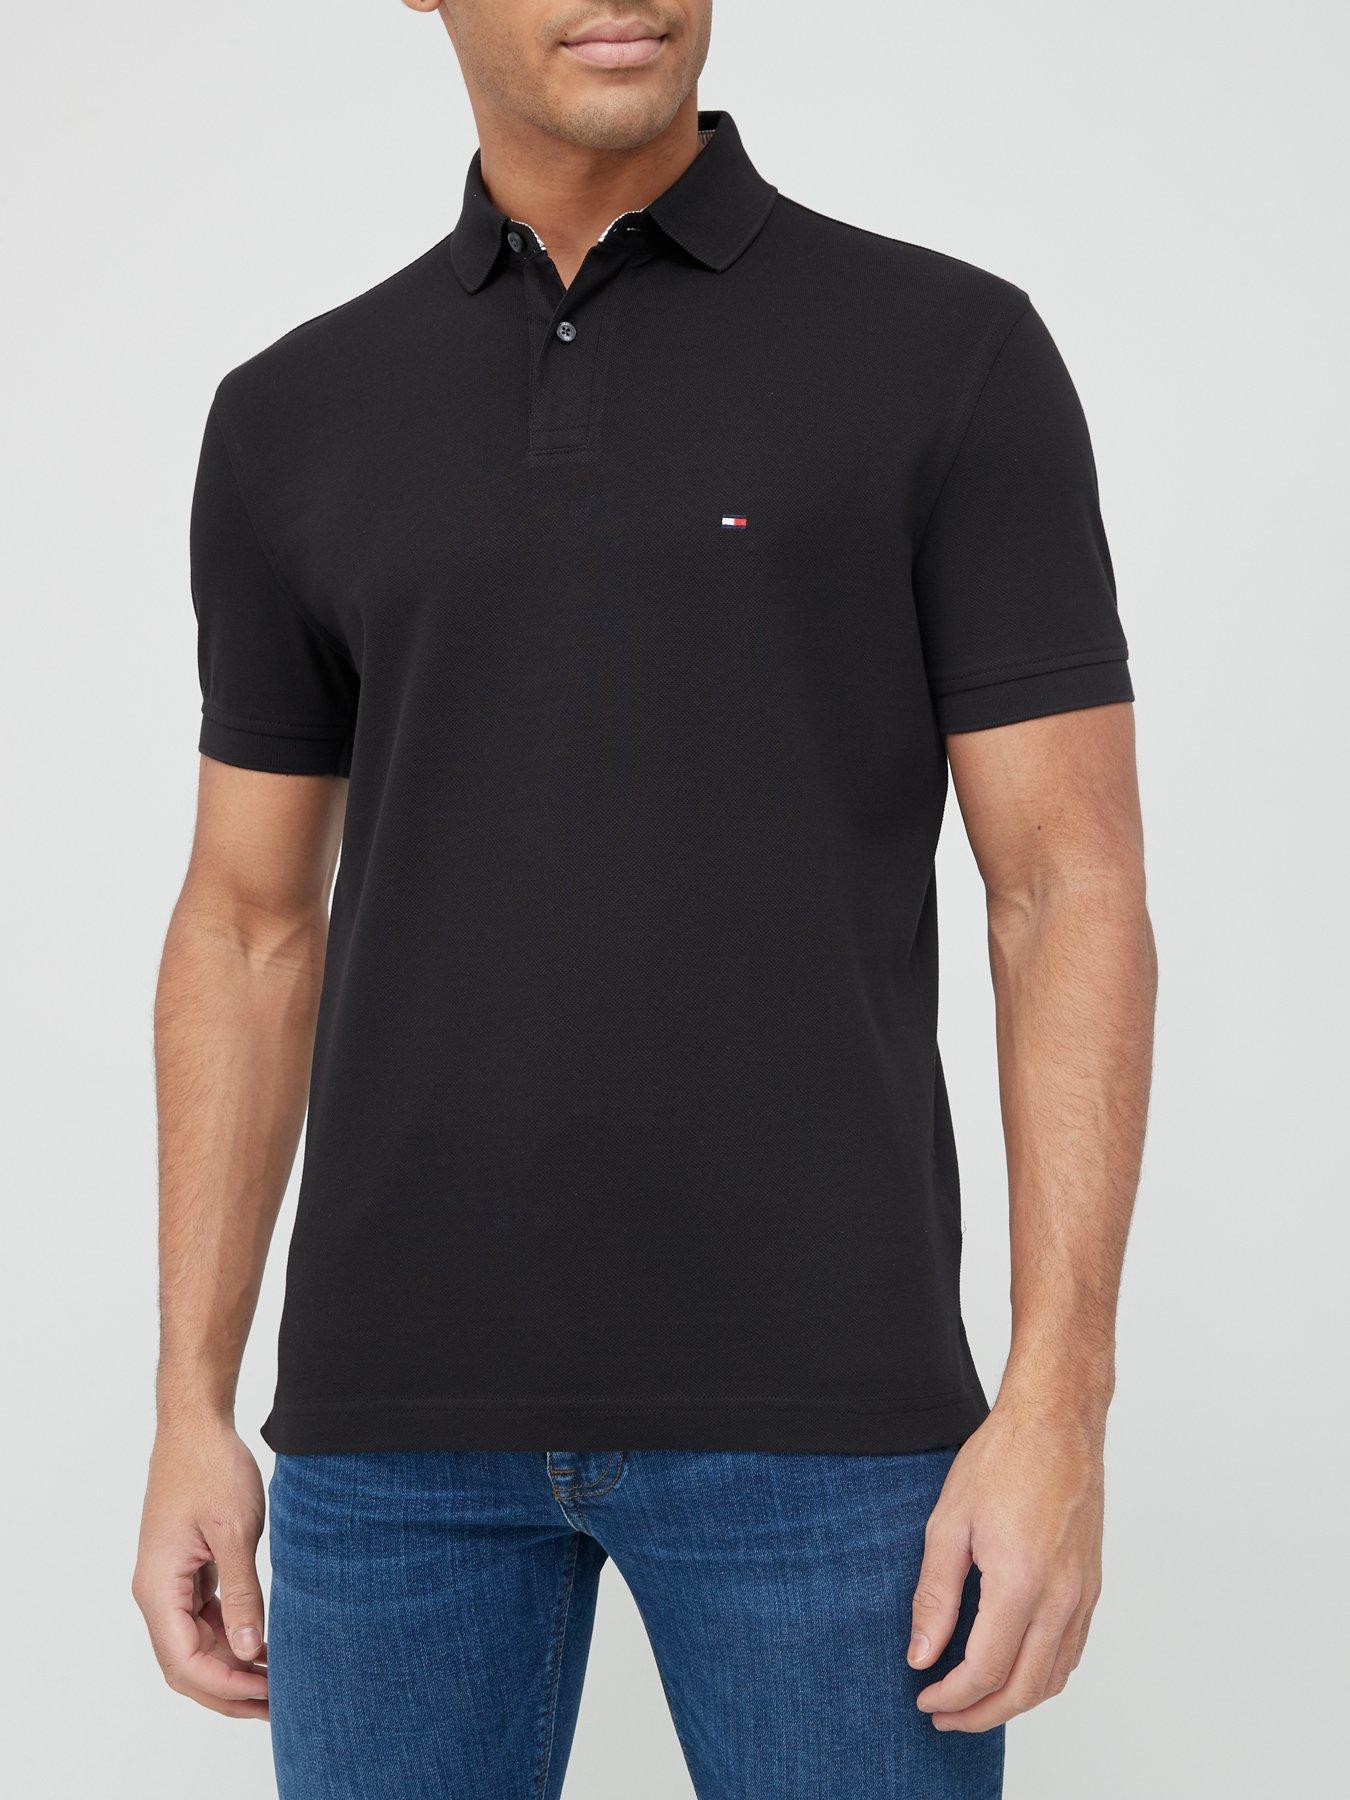 Tommy Hilfiger Men's Big & Tall Short Sleeve Polo in Classic Fit 